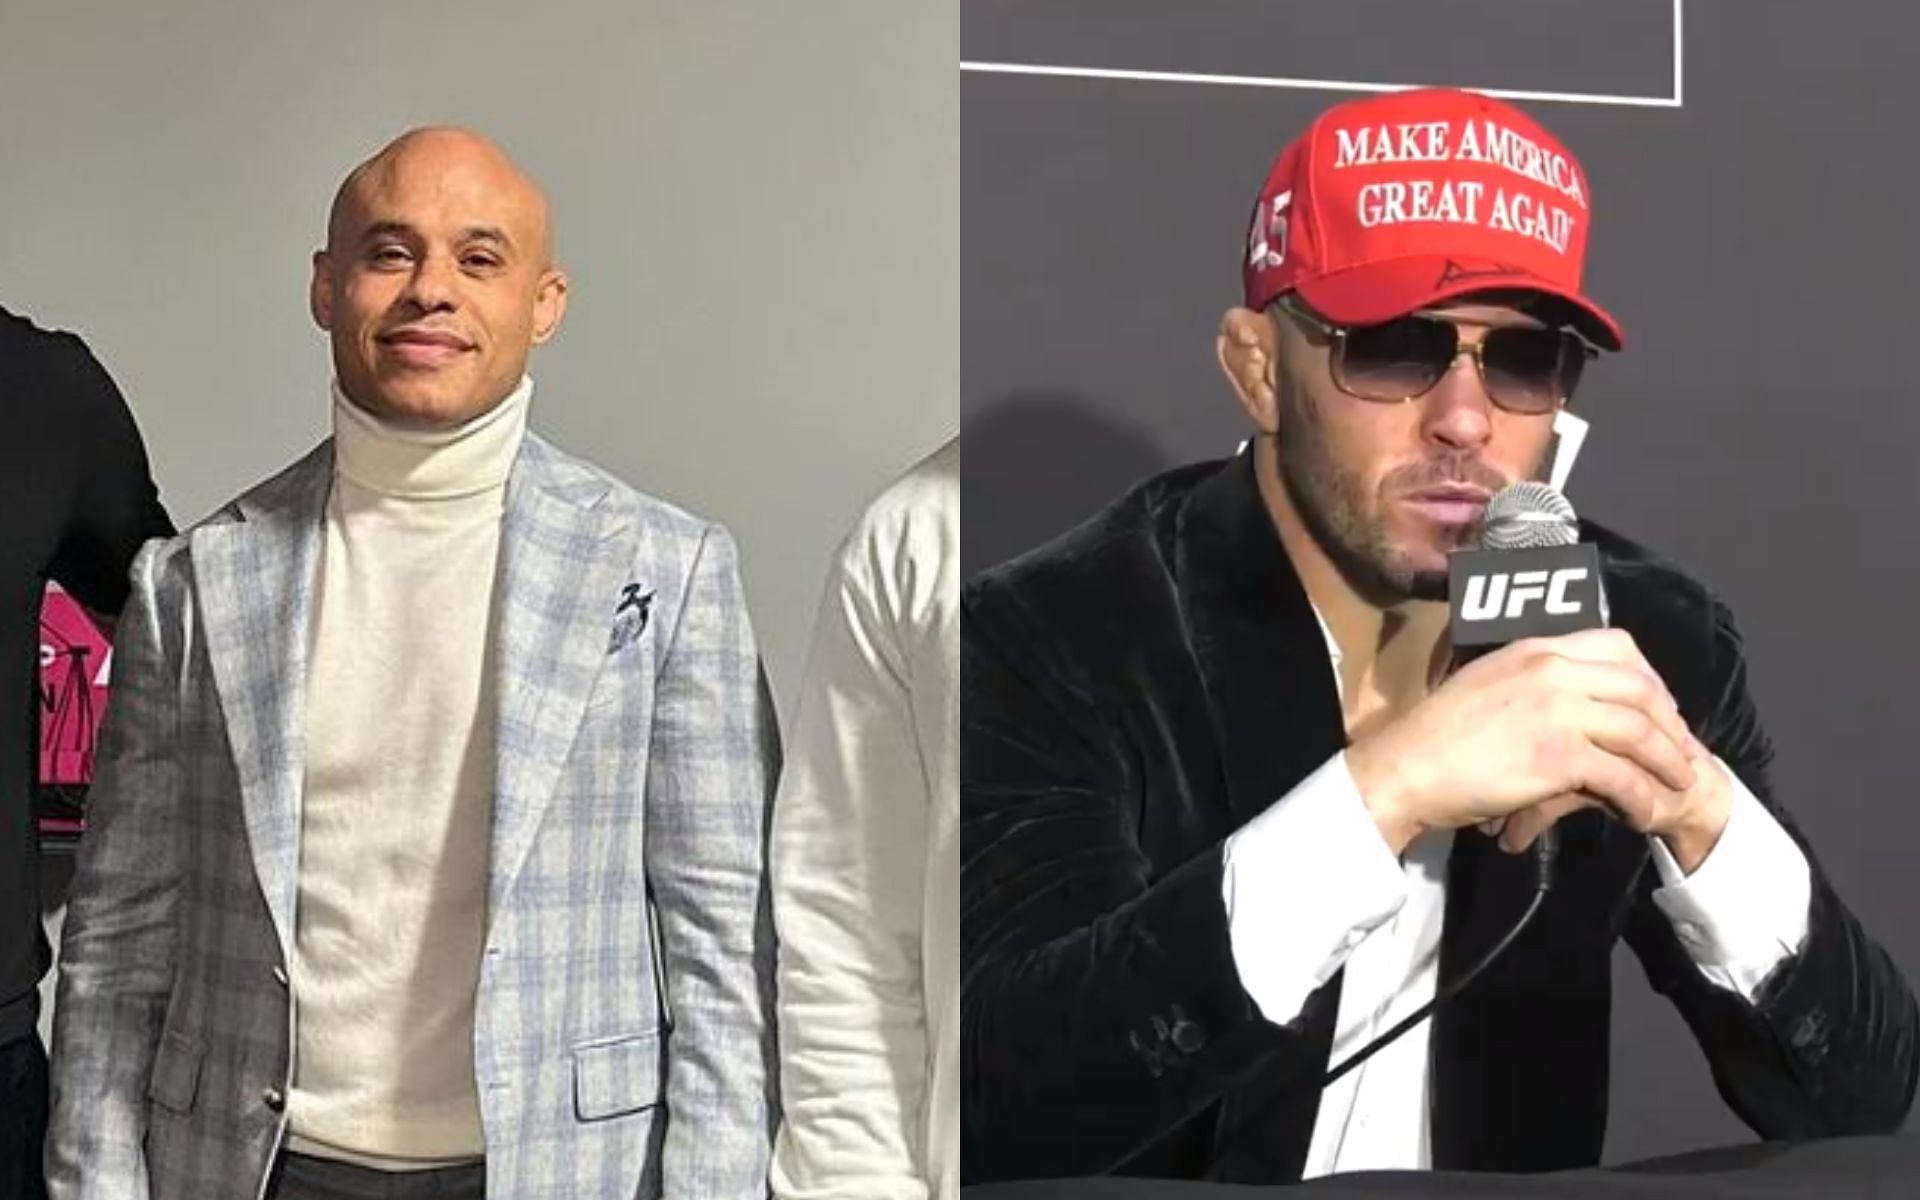 Ali Abdelaziz (left) and Sean Strickland during a press conference (right) (Images courtesy @aliabdelaziz on Instagram and @MMAFighting on X)